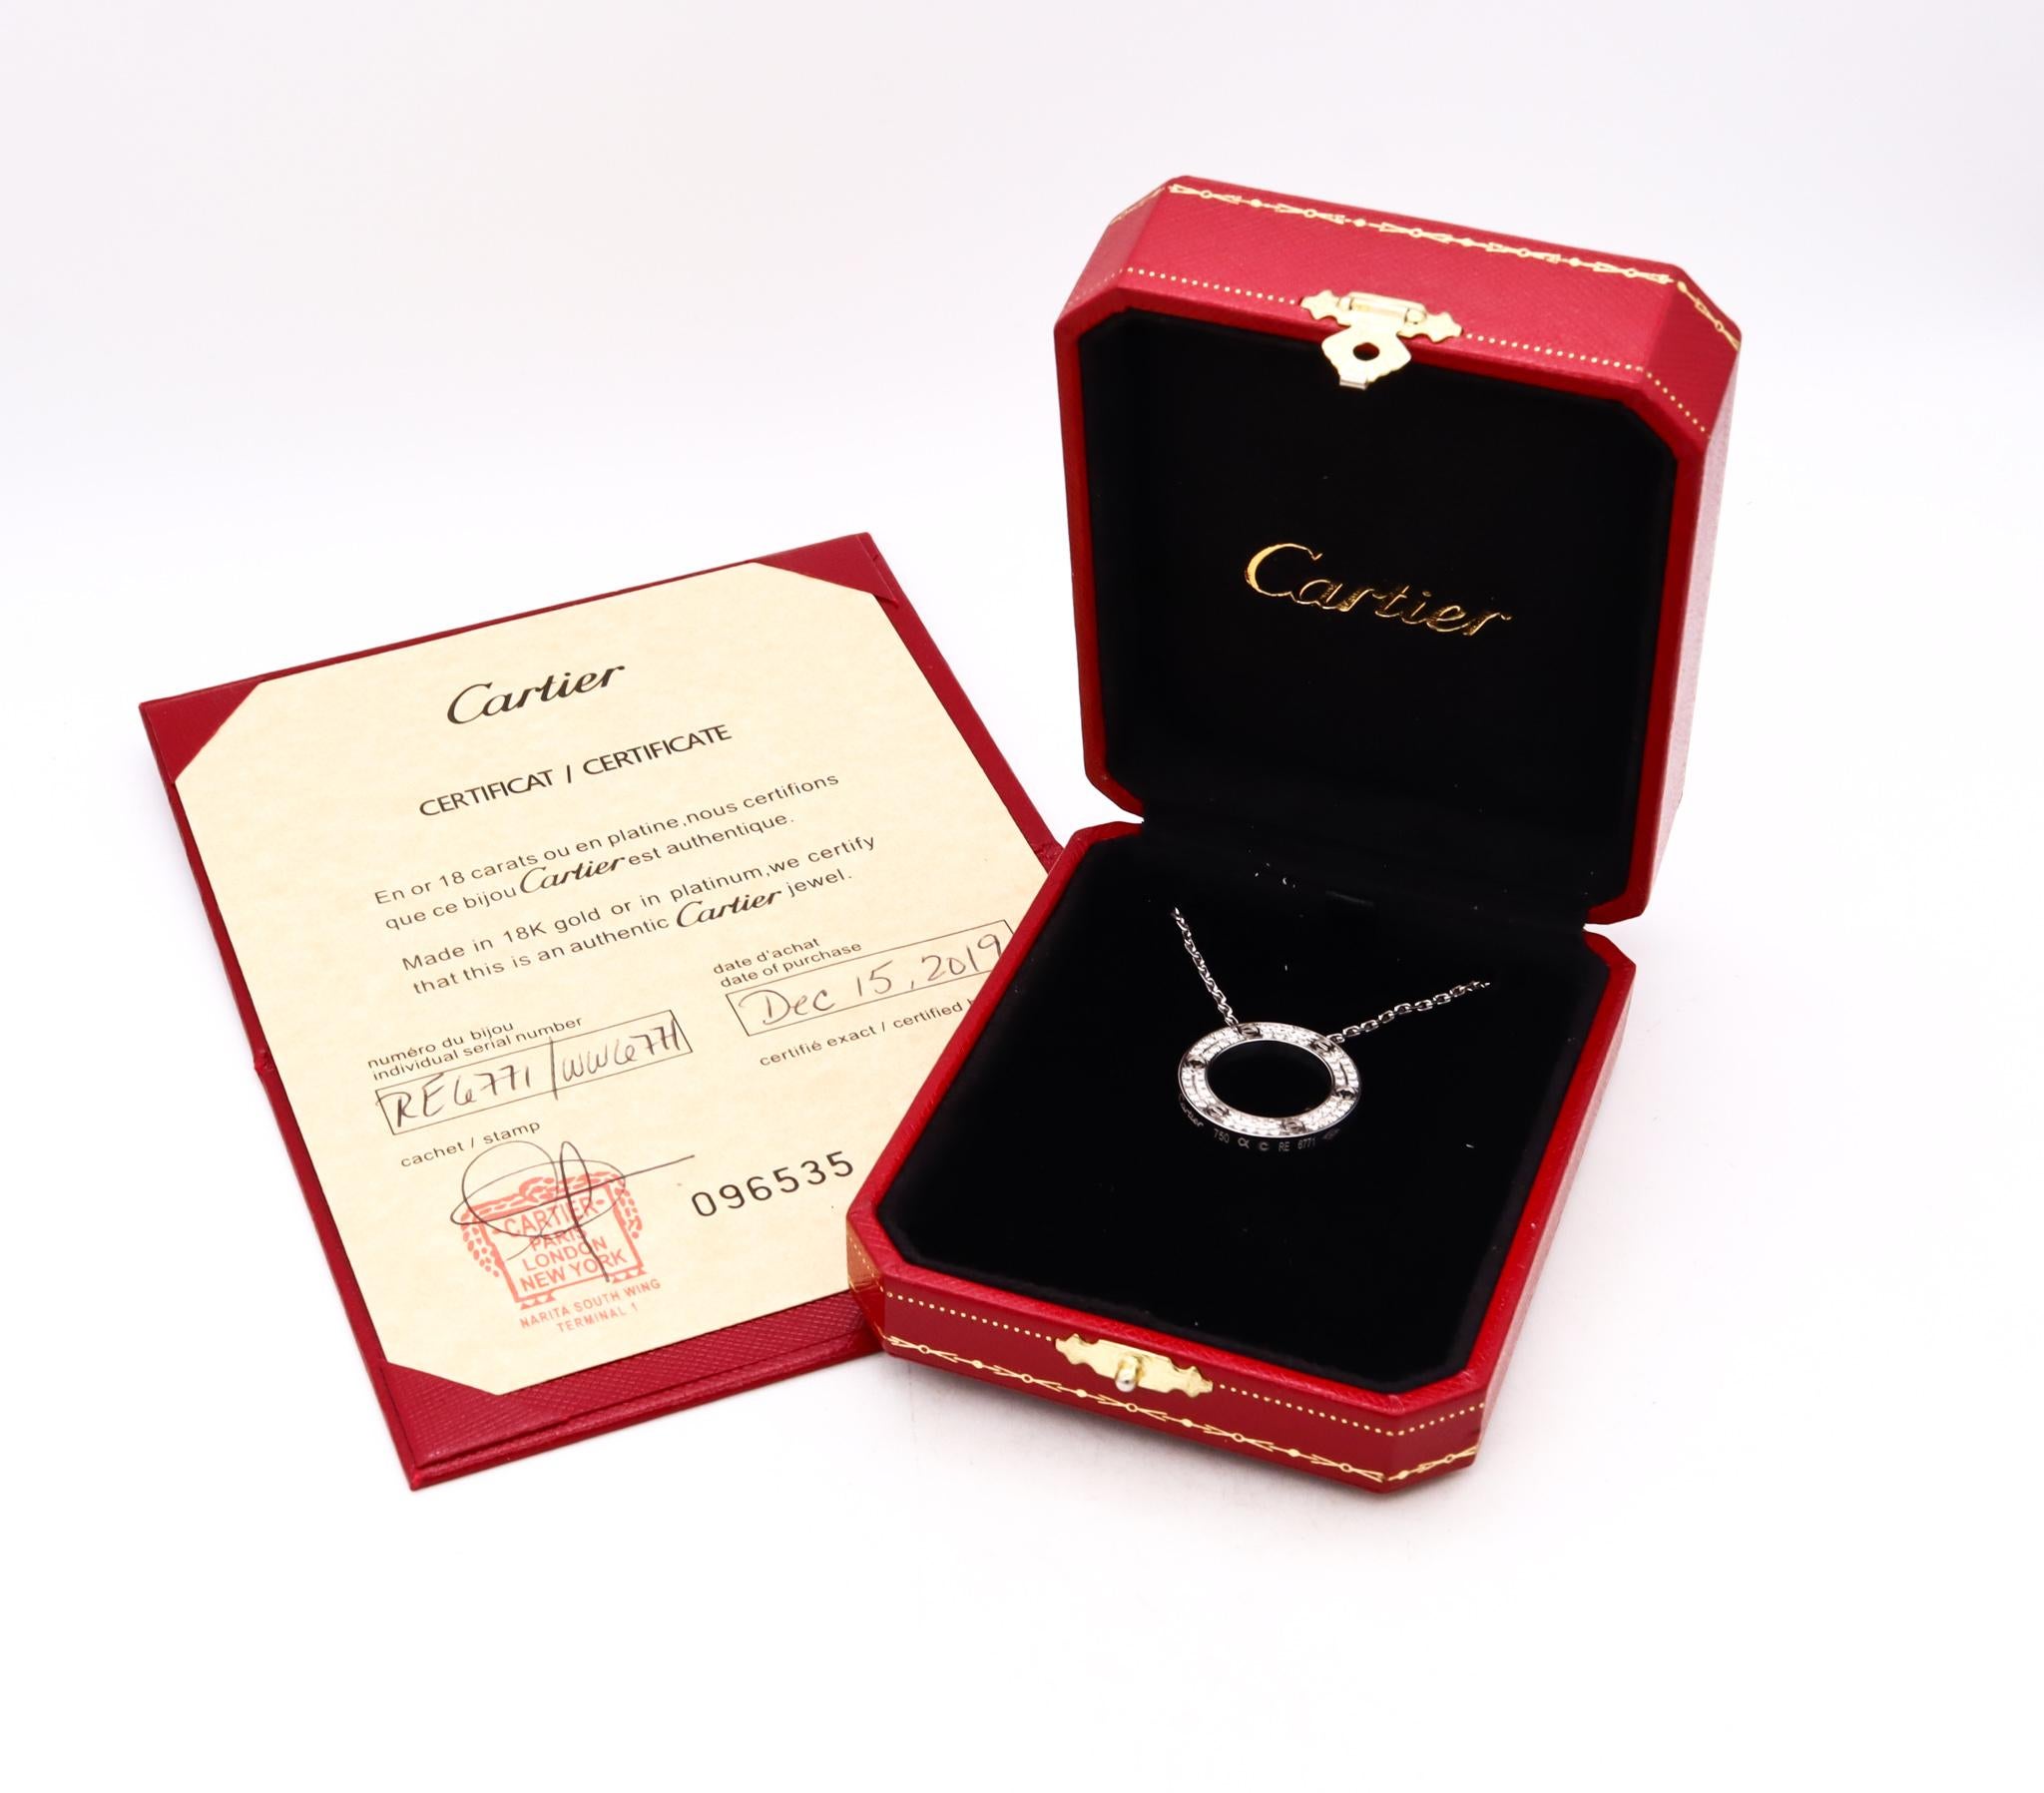 Love necklace with diamonds designed by Cartier.

A modern contemporary creation, part of the Maison collection. Love De Cartier. This round love amulet, was carefully crafted in solid 18 karats of high polished white gold and is suited with a chain